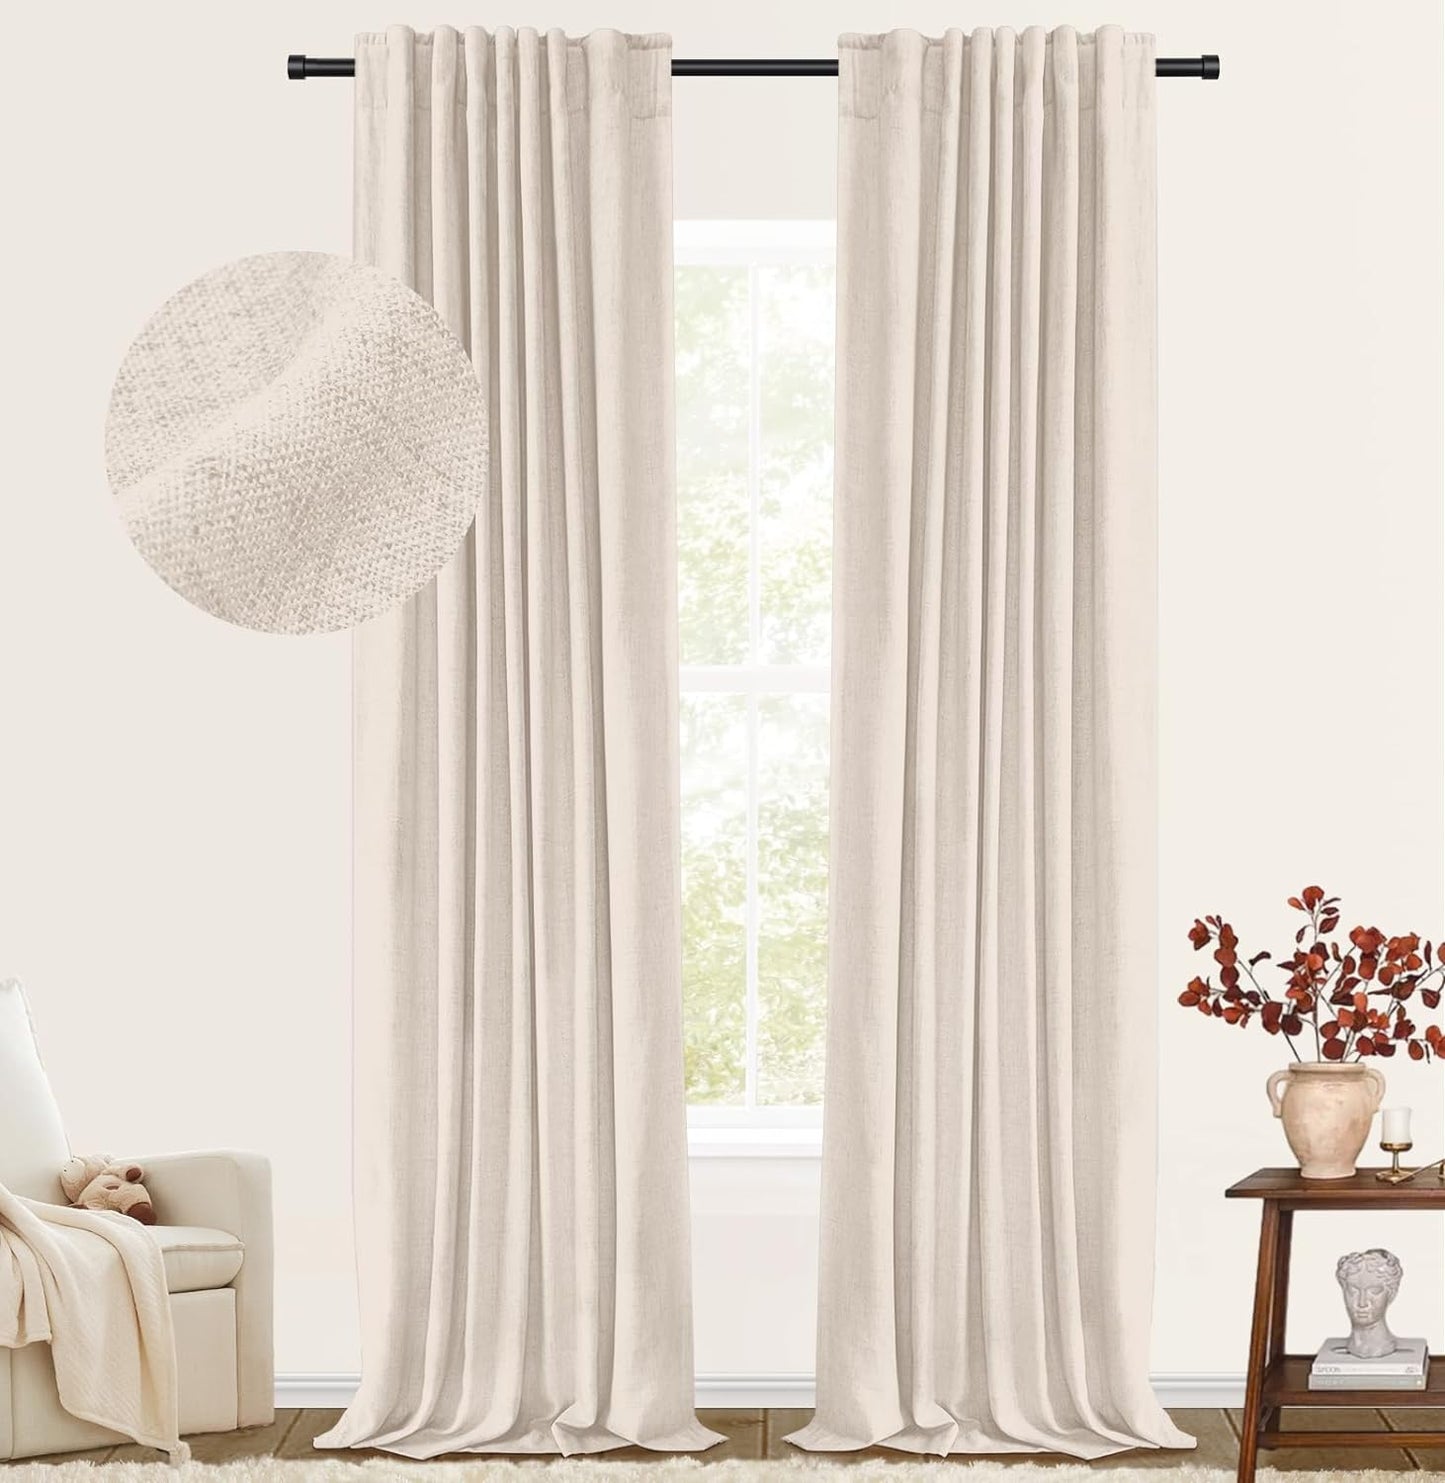 100% Blackout Shield Blackout Curtains for Bedroom Faux Linen Black Out Curtains 84 Inch Length 2 Panels Set, Back Tab/Rod Pocket Thermal Insulated Curtains with Black Liner, 50W X 84L, Dark Grey  100% Blackout Shield 06 Birch 50''W X 108''L 